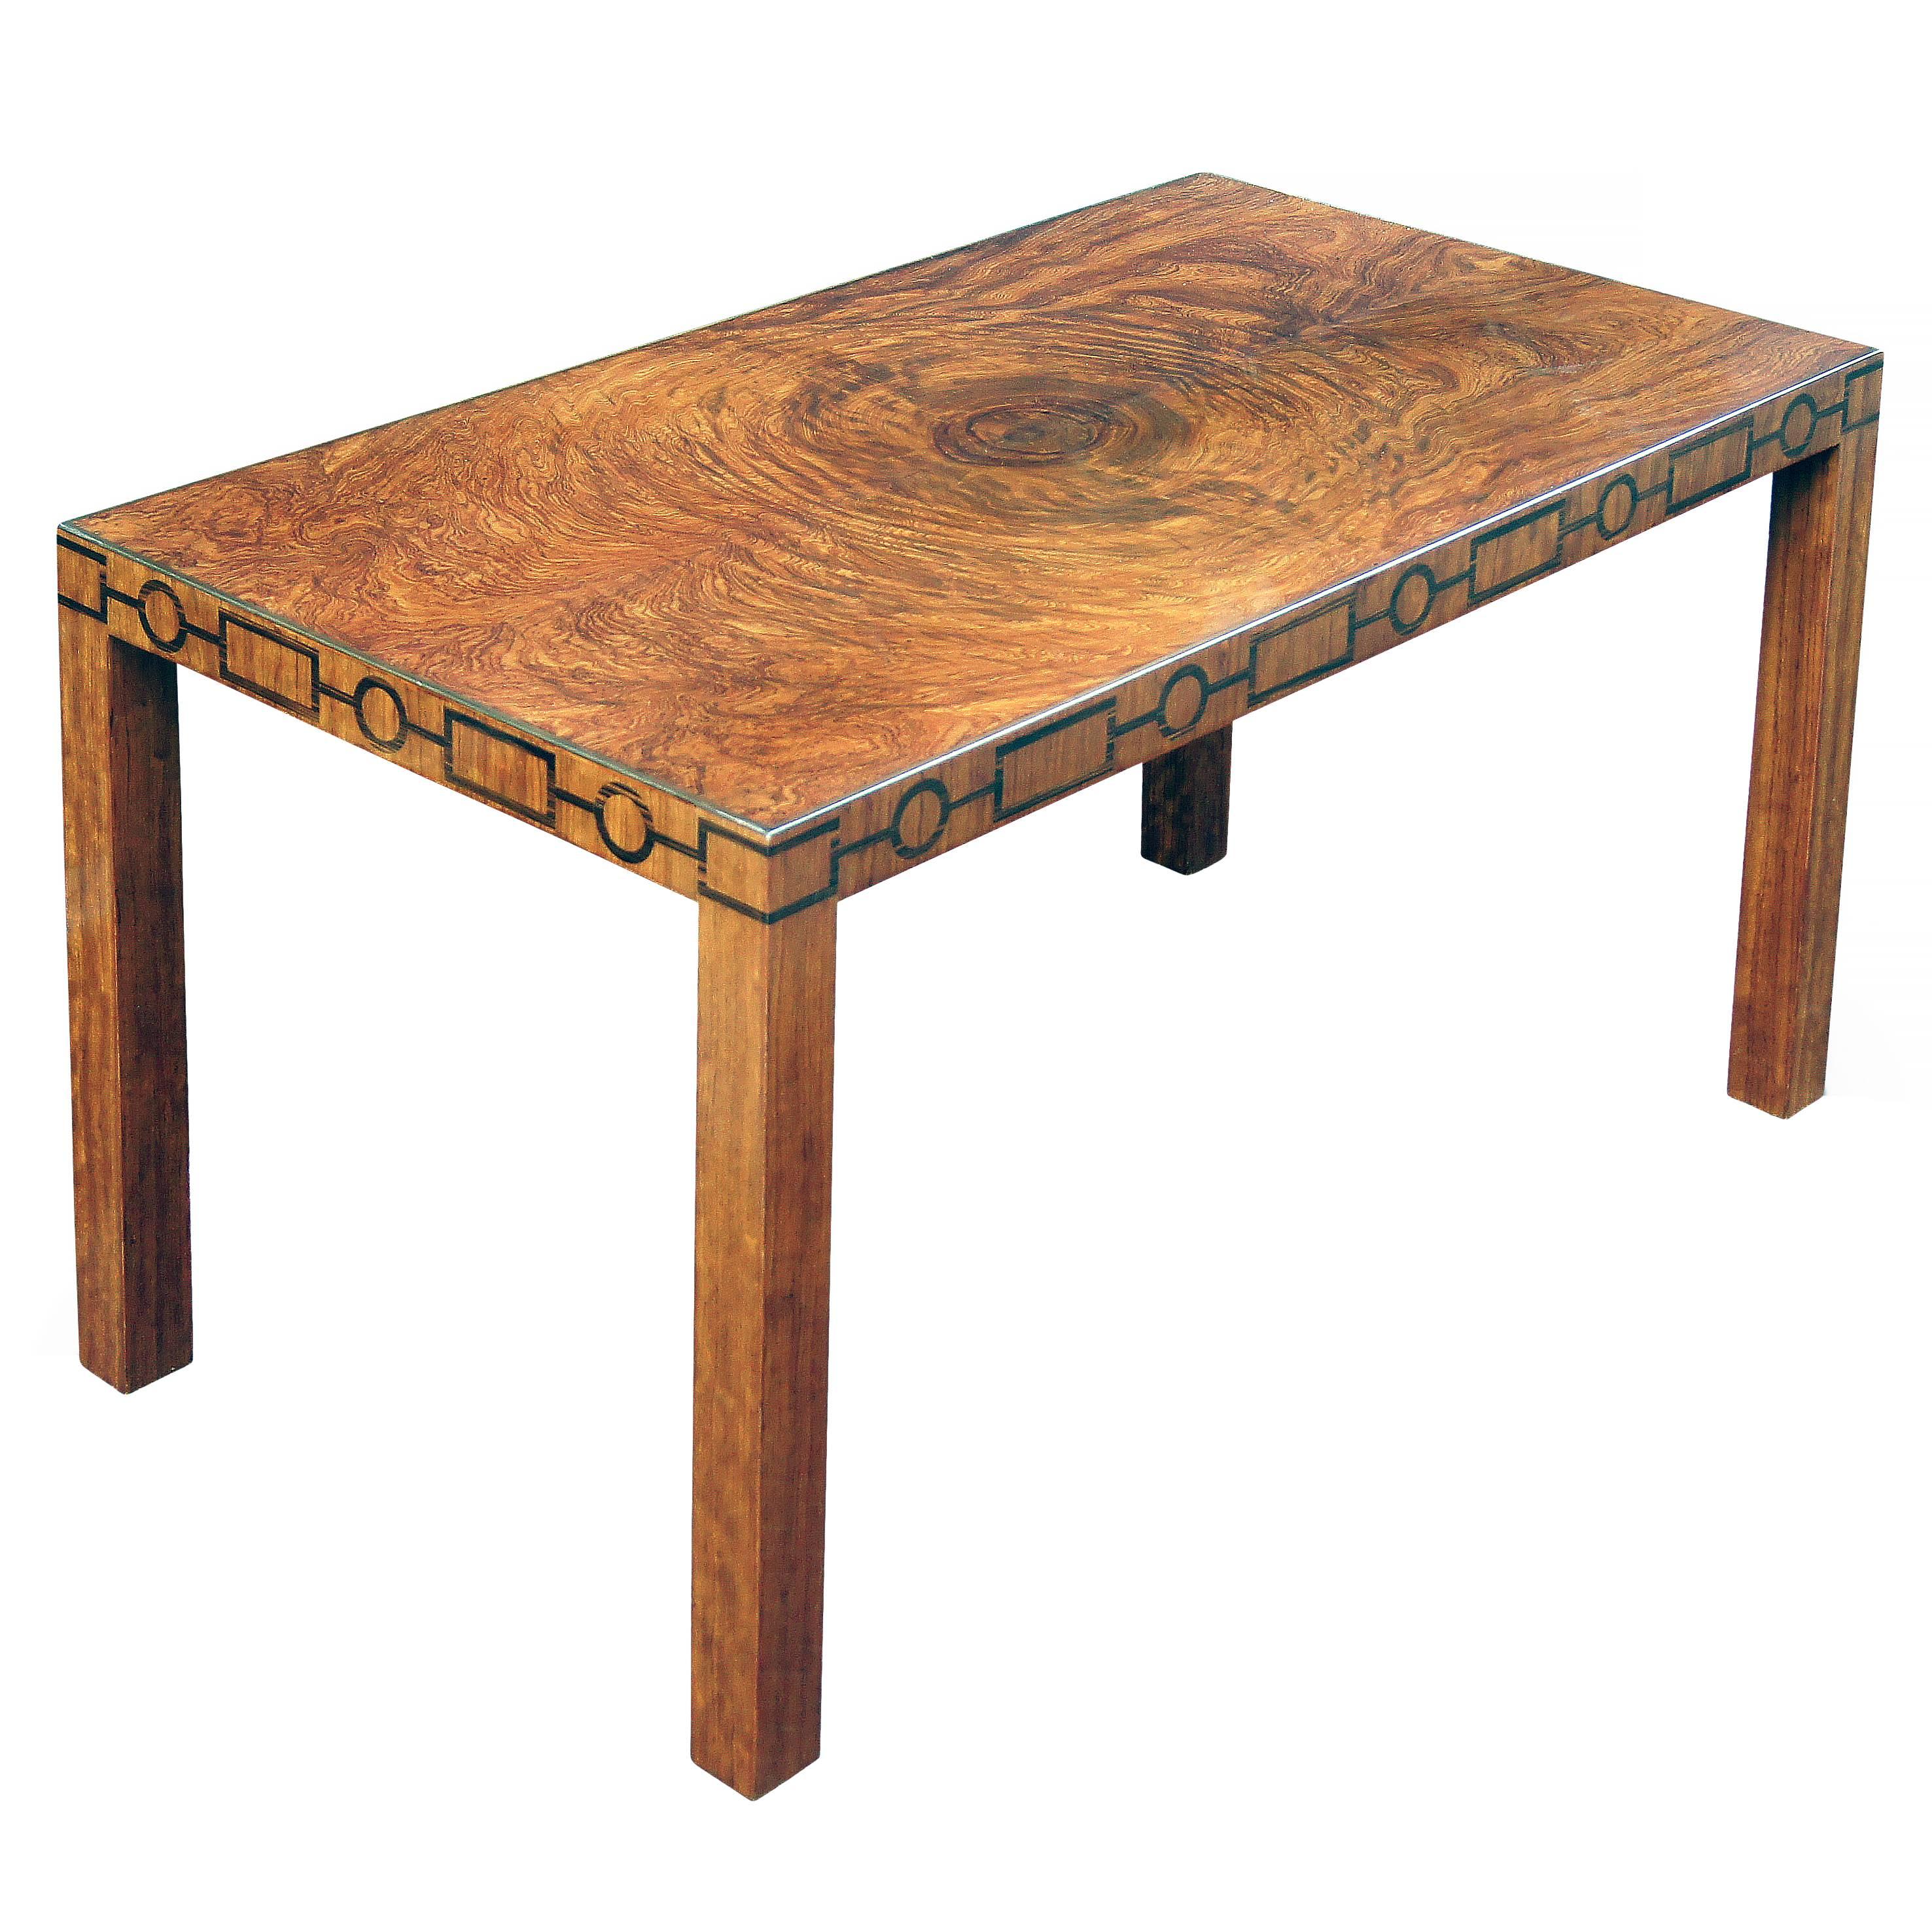 Very Fine Swedish Modern Classicism Coffee Table with Burl Top and Inlays For Sale